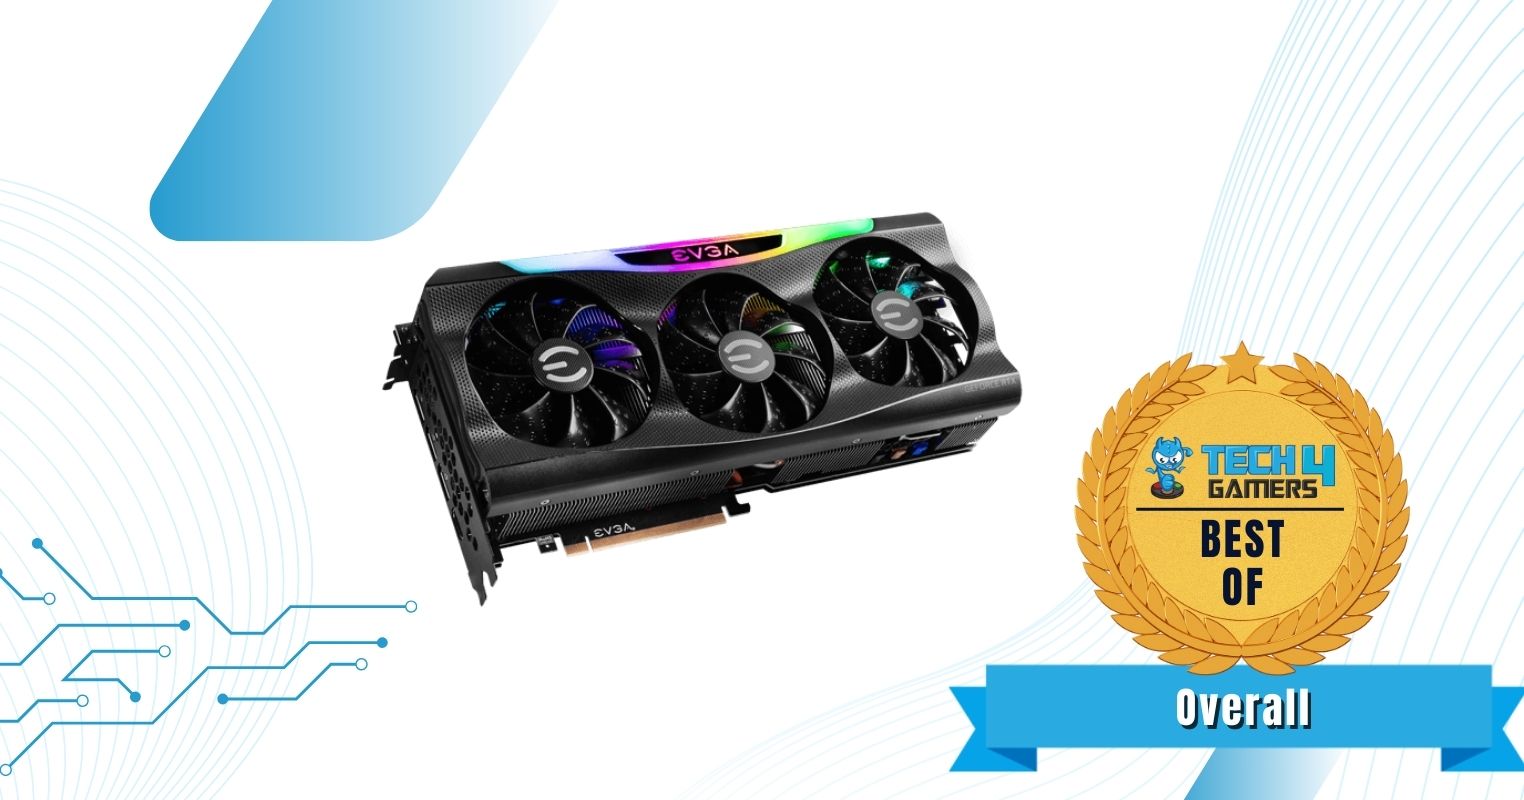 Best Overall RTX 3080 Ti Graphics Card - EVGA GeForce RTX 3080 Ti FTW3 Ultra Gaming